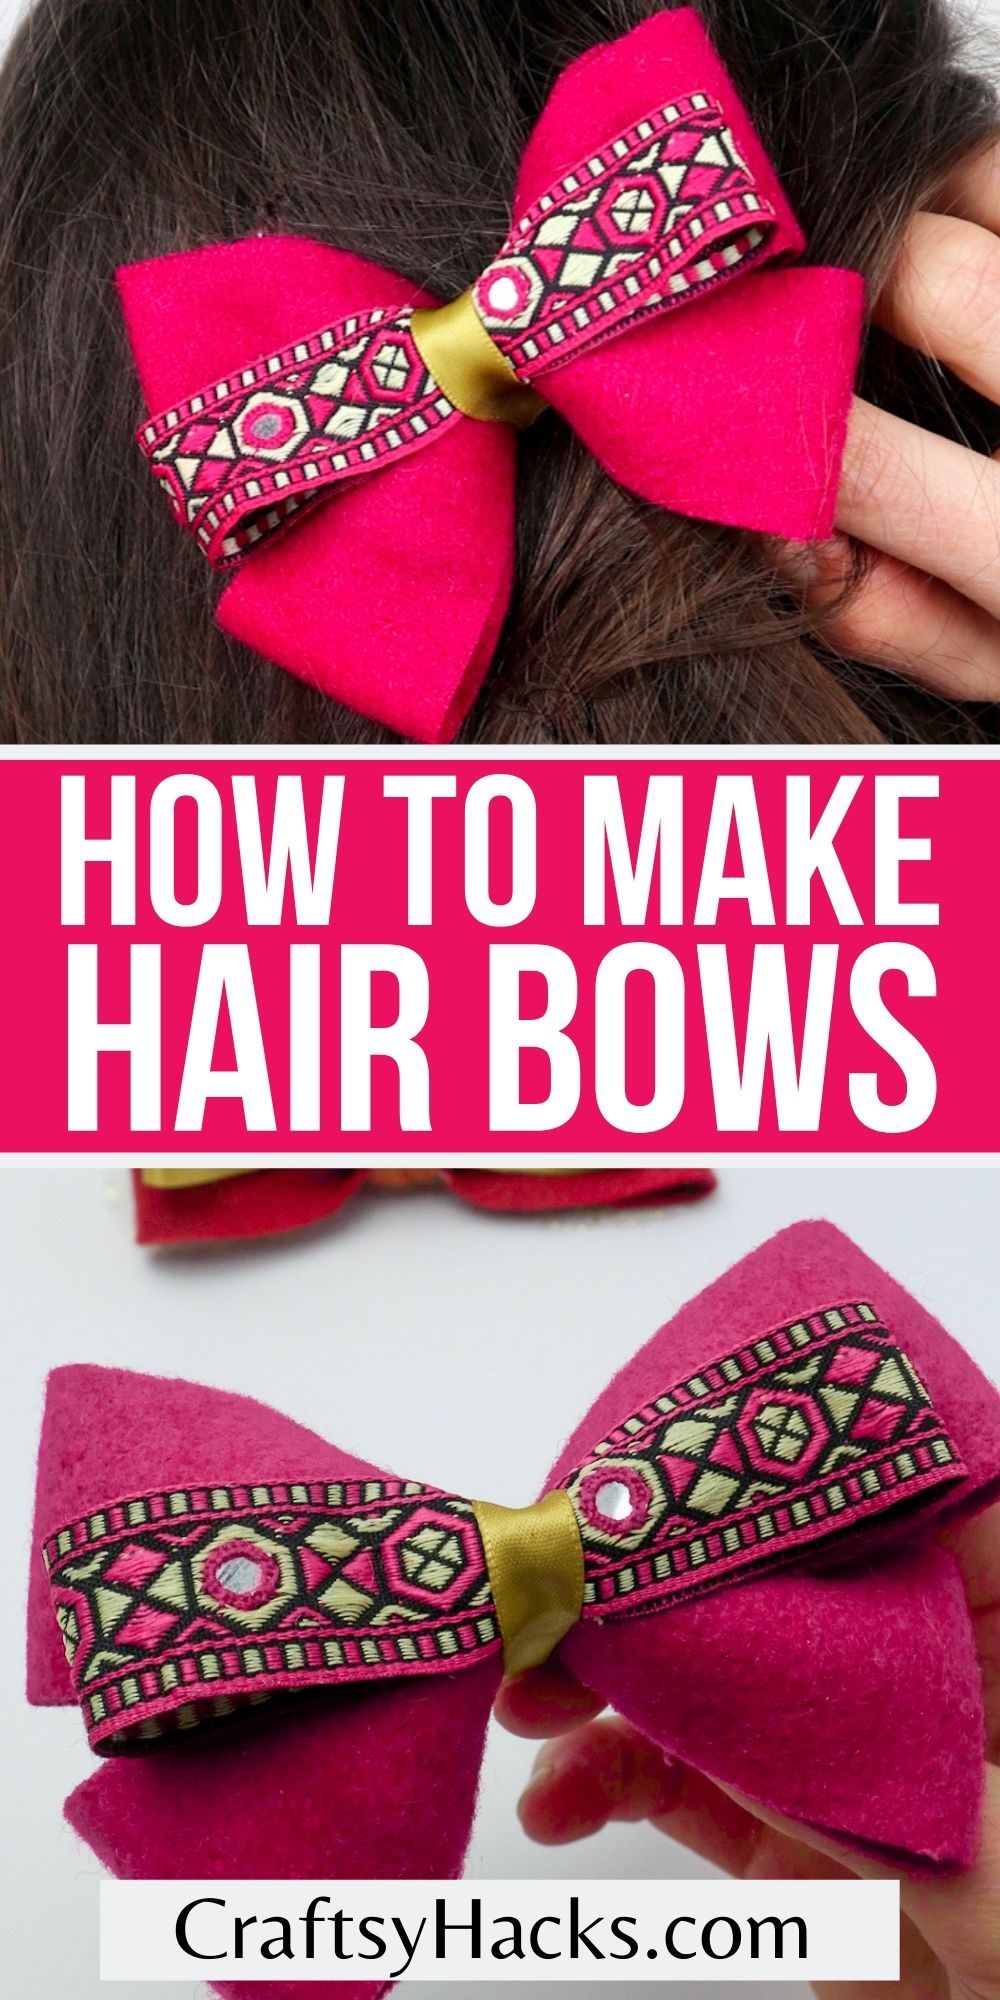 3 DVDs & 3 eBooks Instant Video Access How To Make Hair Bows & Hair Clips 